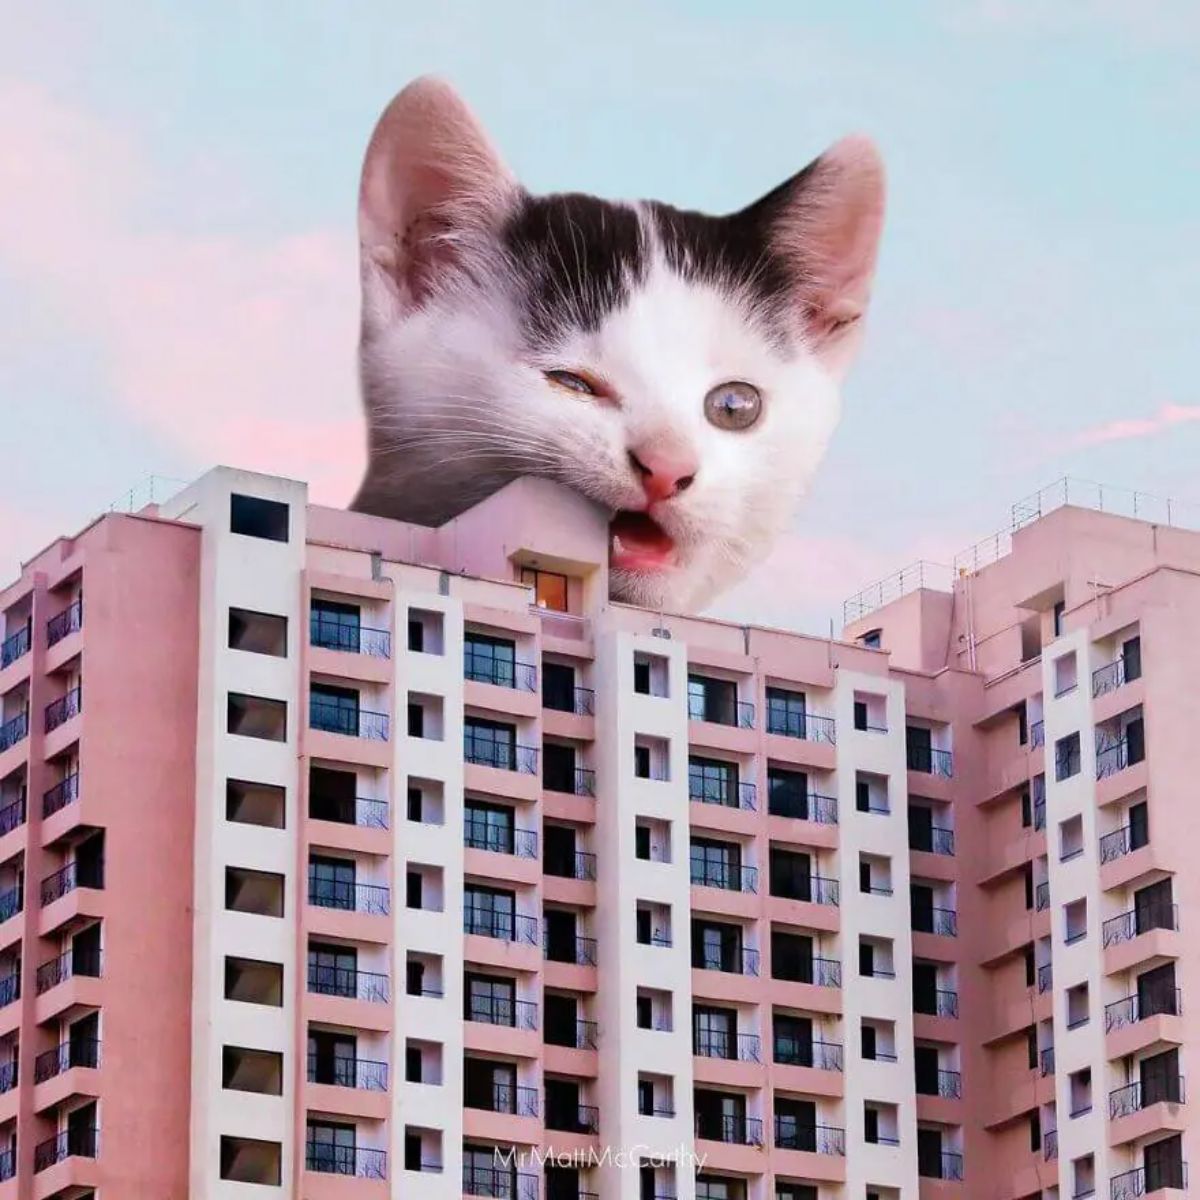 large photoshopped white and black kitten chewing a white and pink building